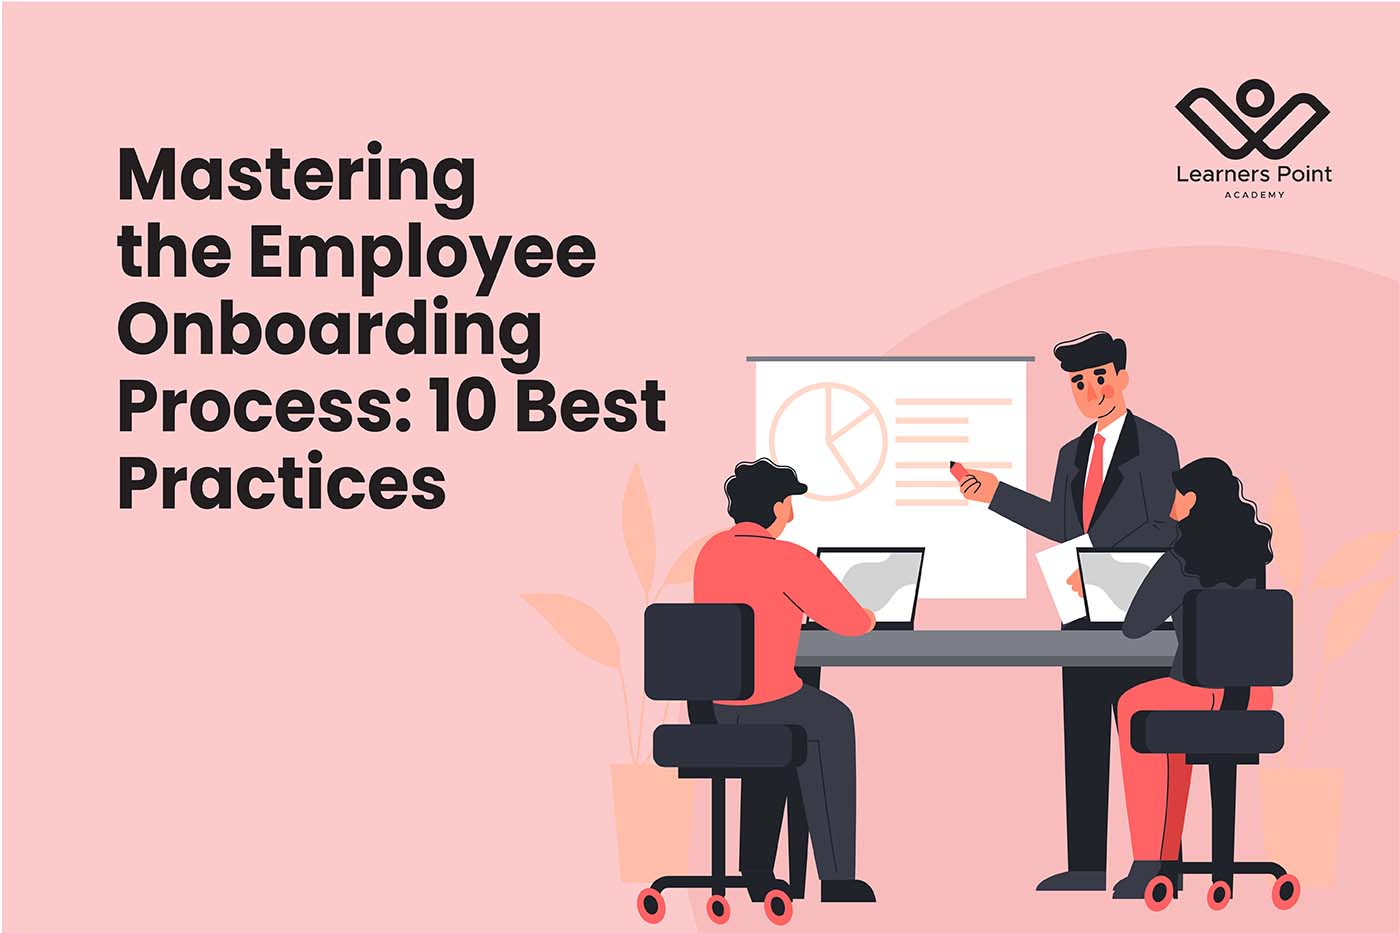 Mastering the Employee Onboarding Process: 10 Best Practices